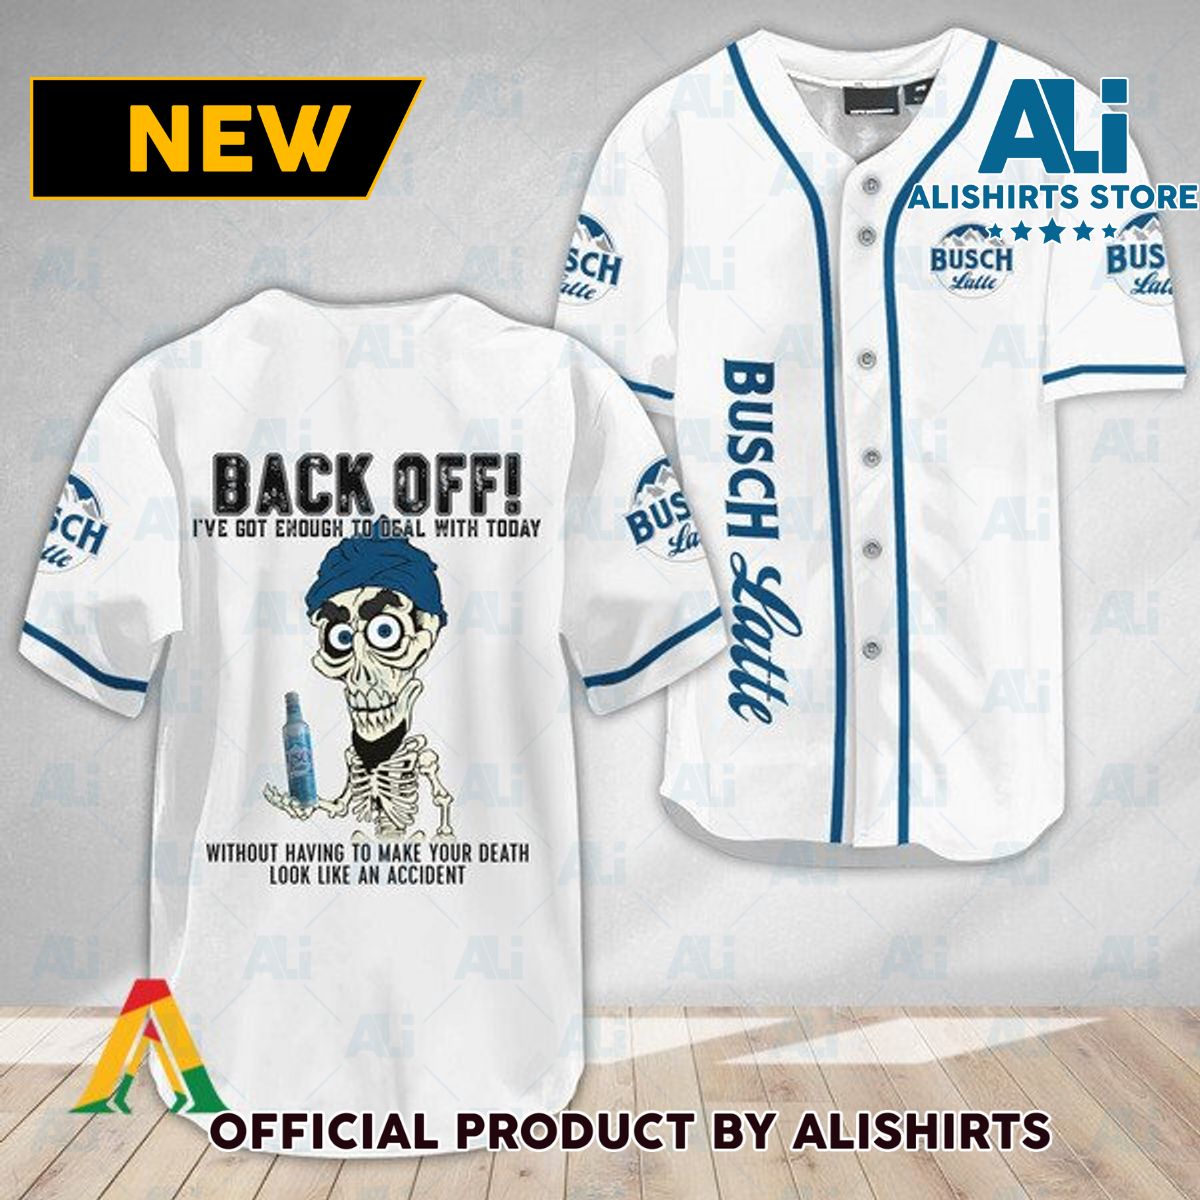 Achmed Back Off With Busch Latte Baseball Jersey